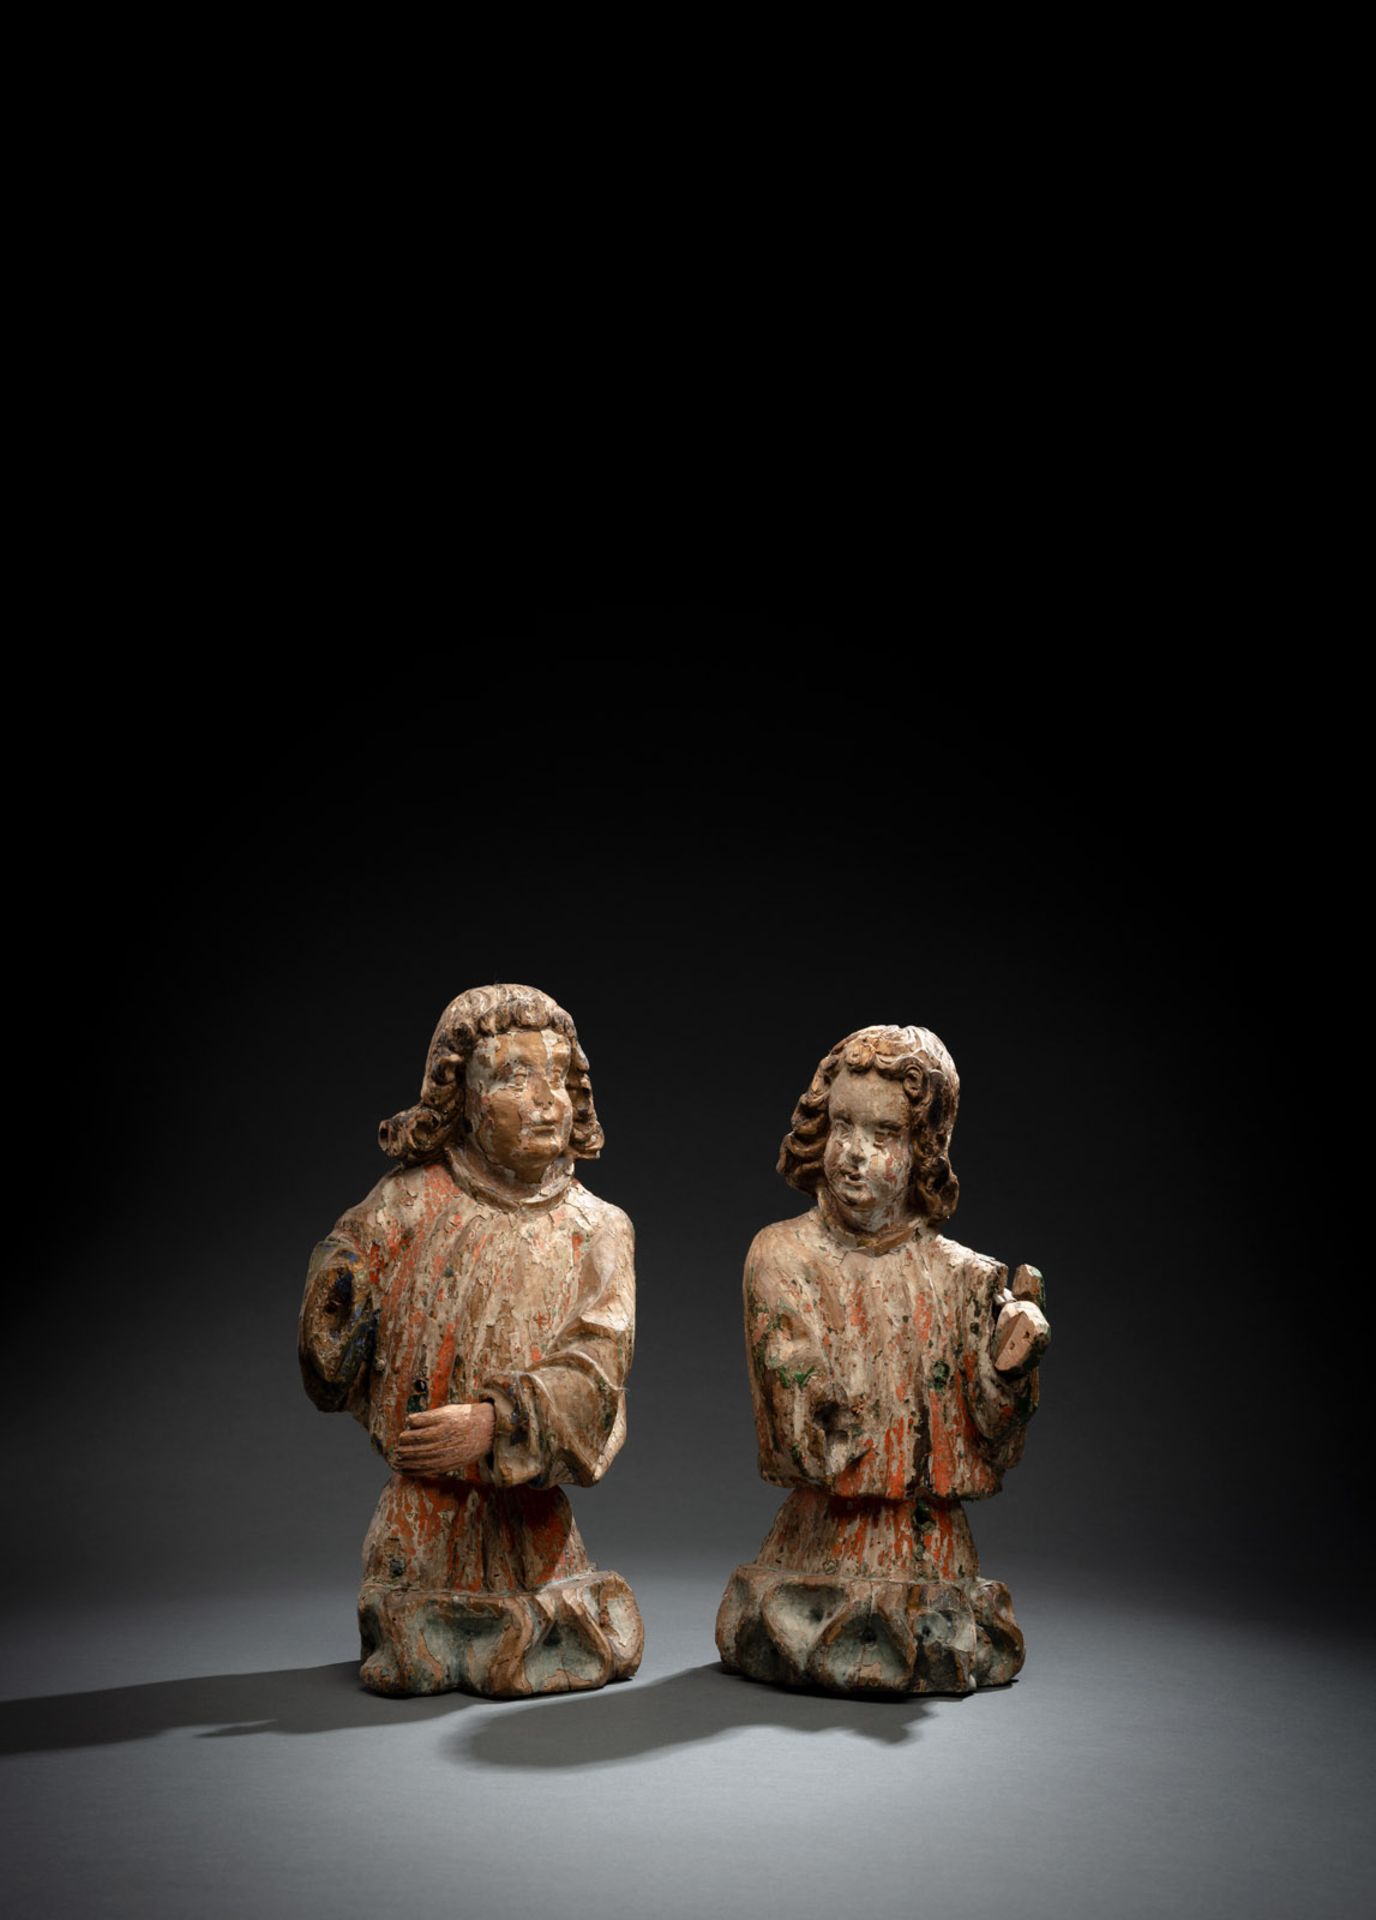 A PAIR OF PROBABLY FRANCONIAN GOTHIC ANGELS ON BANDS OF CLOUDS